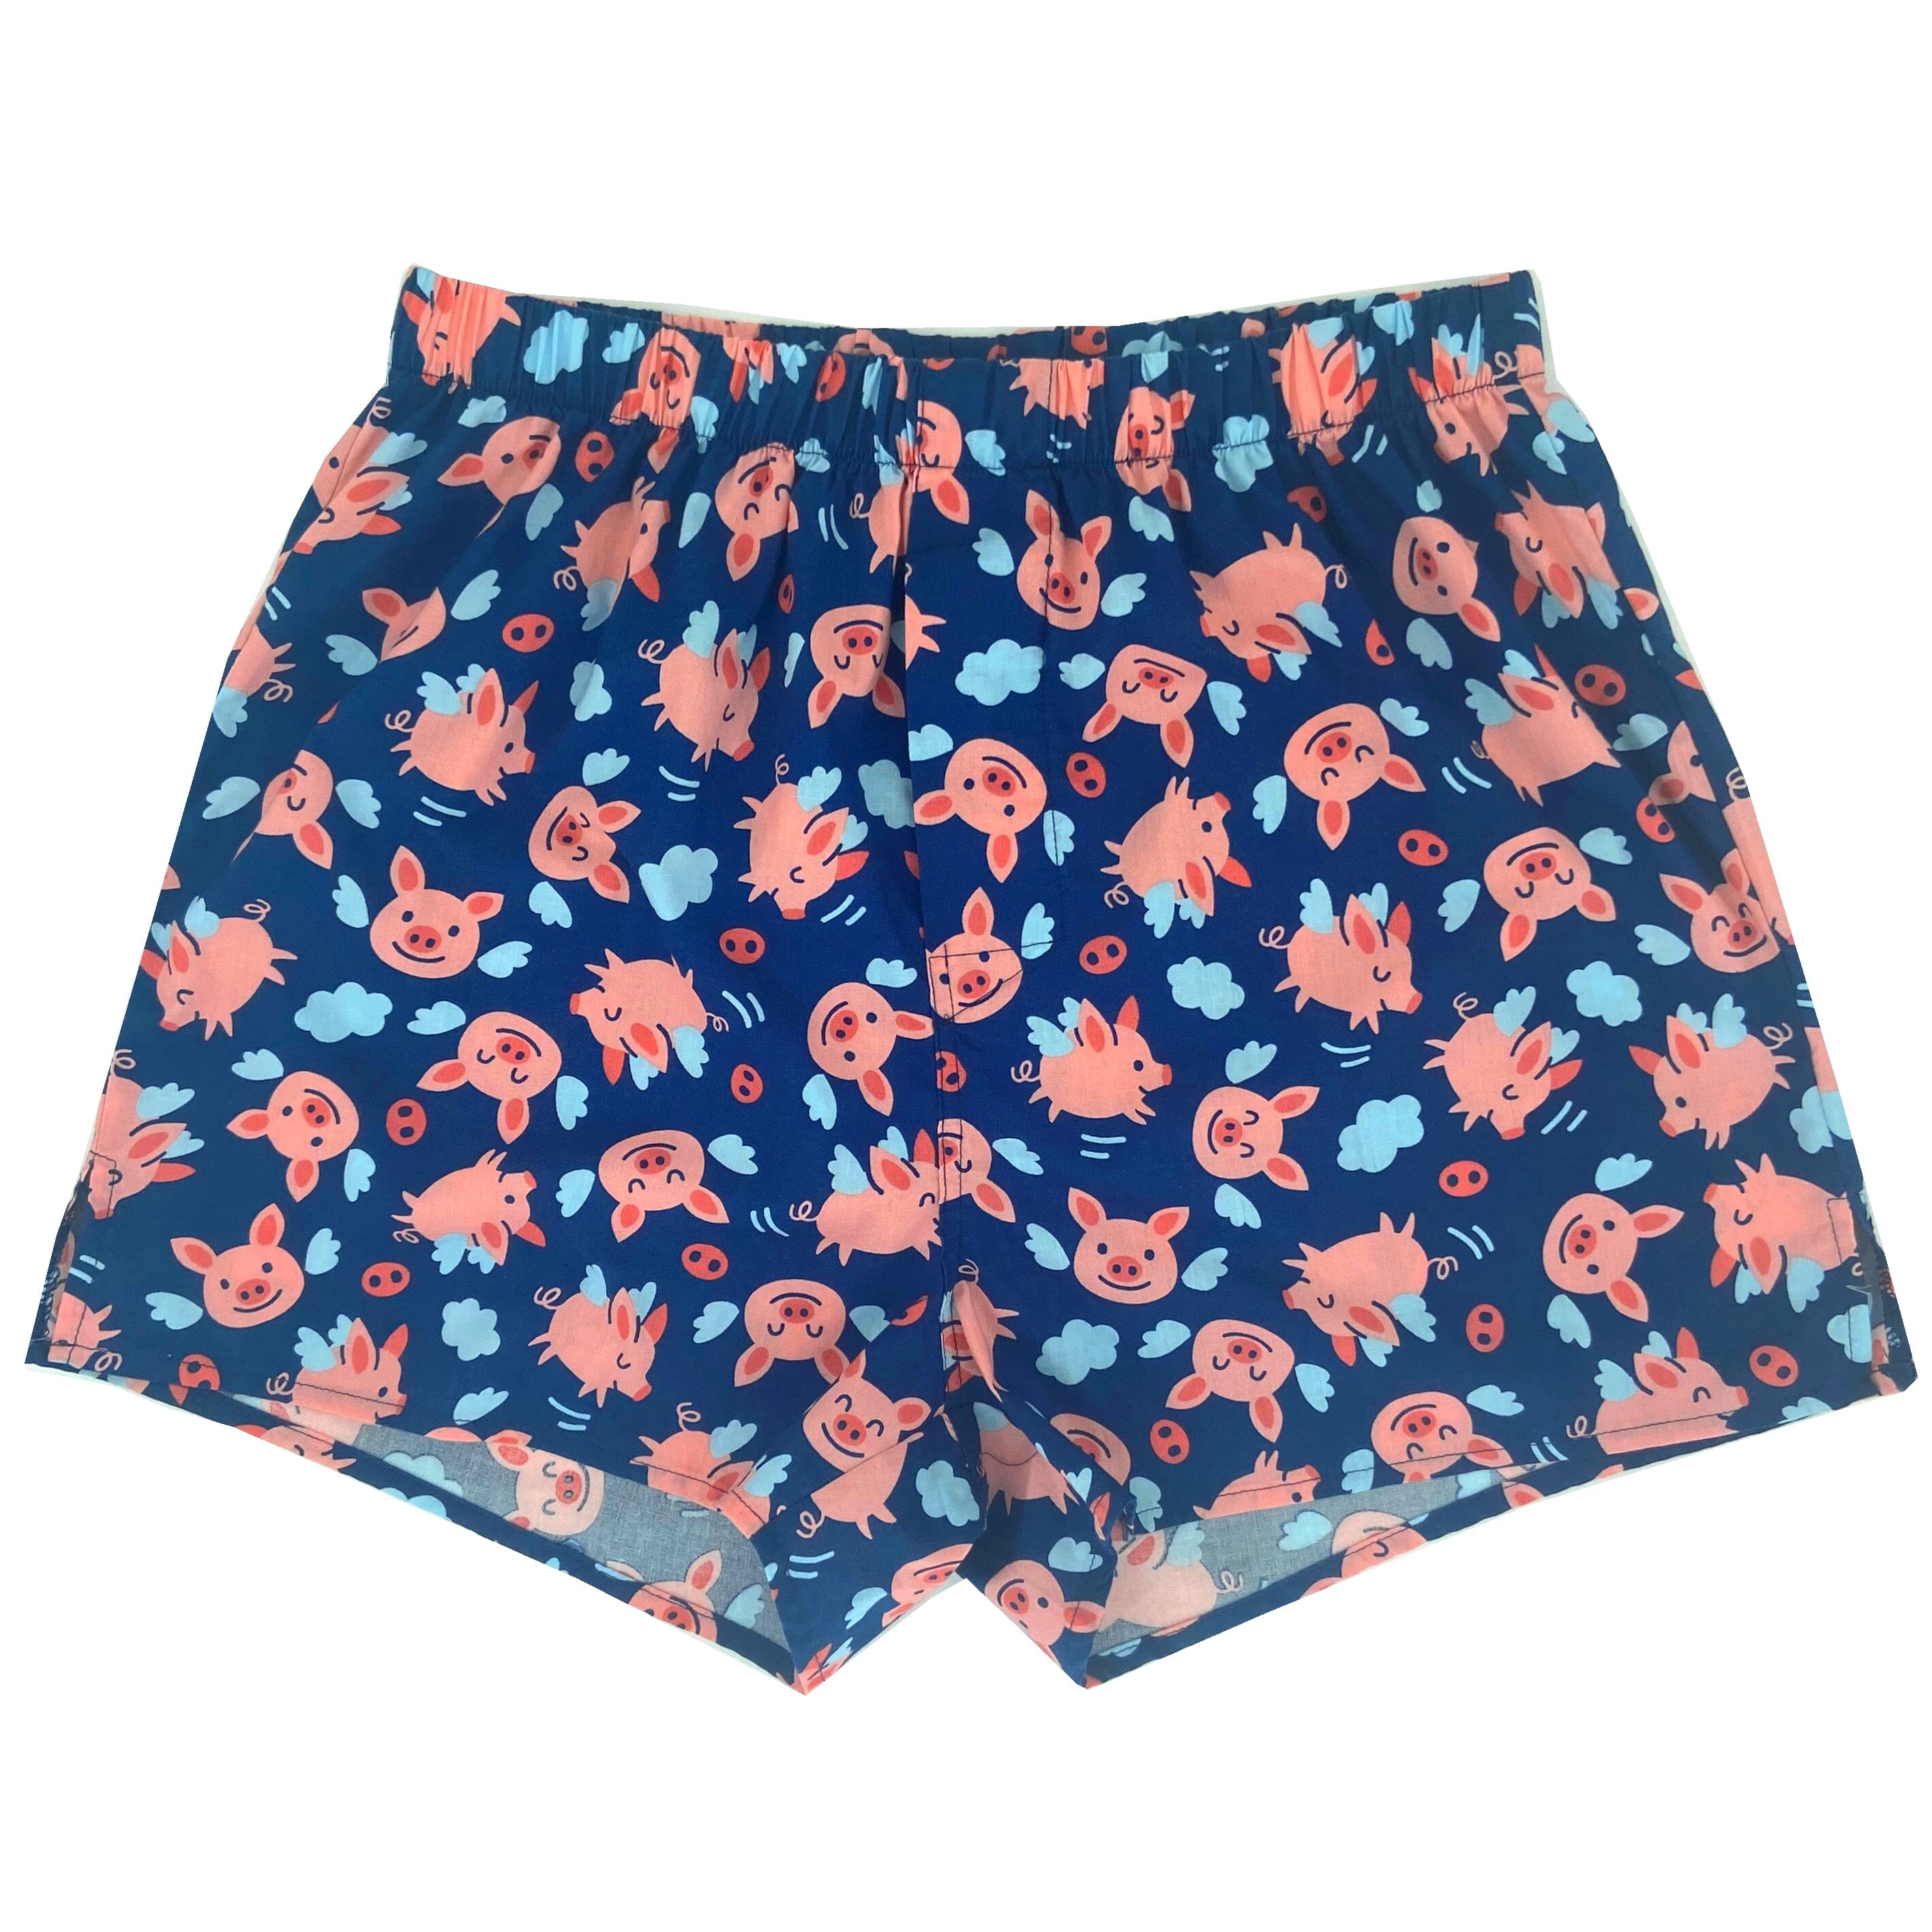 Men's Fun Unusual Pink Flying Pigs All Over Print Cotton Boxer Shorts